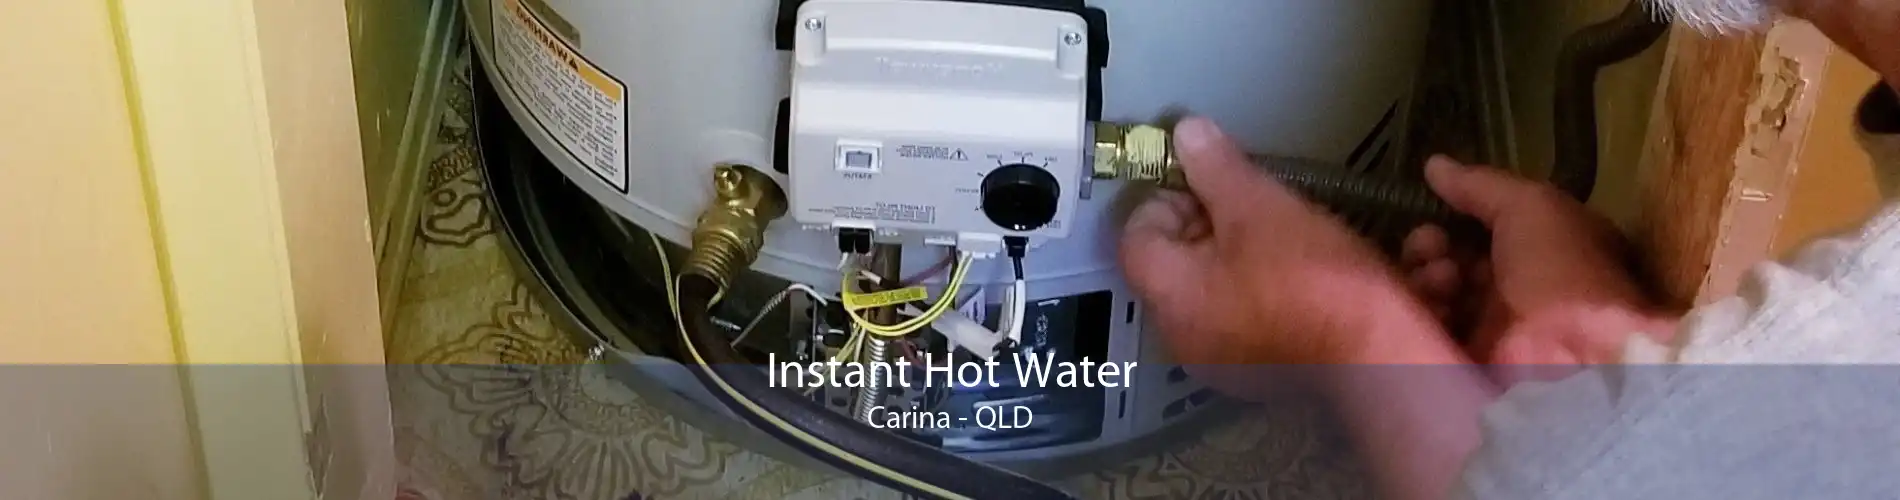 Instant Hot Water Carina - QLD